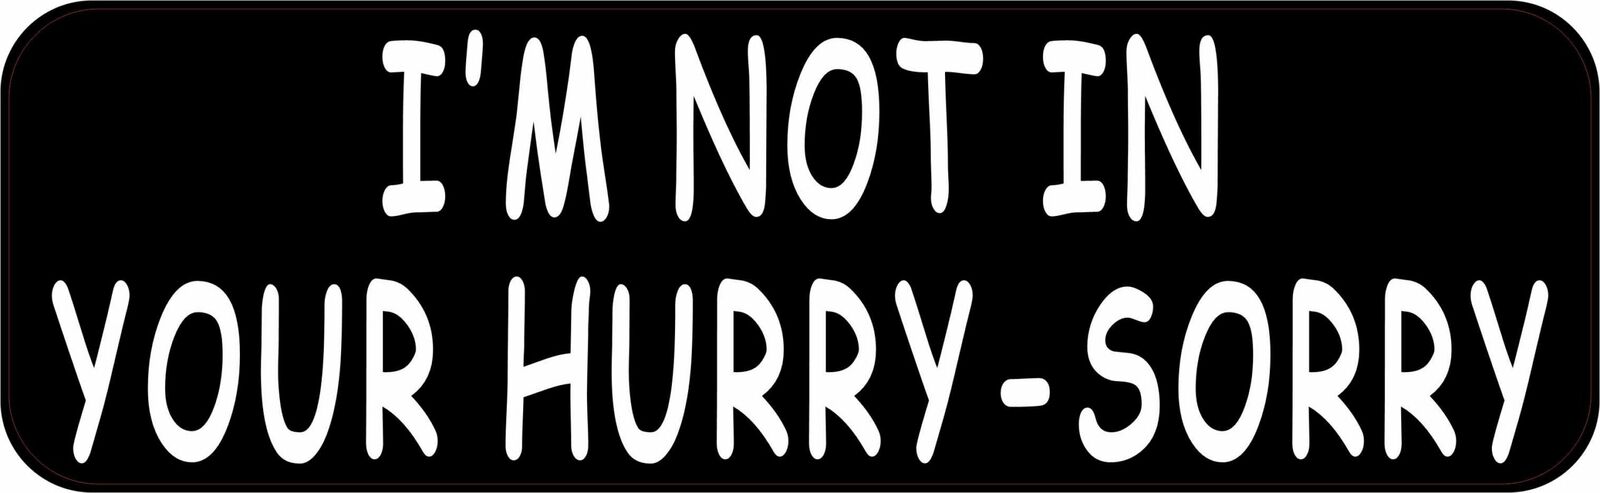 10in x 3in Im Not in Your Hurry Magnet Car Truck Vehicle Magnetic Sign